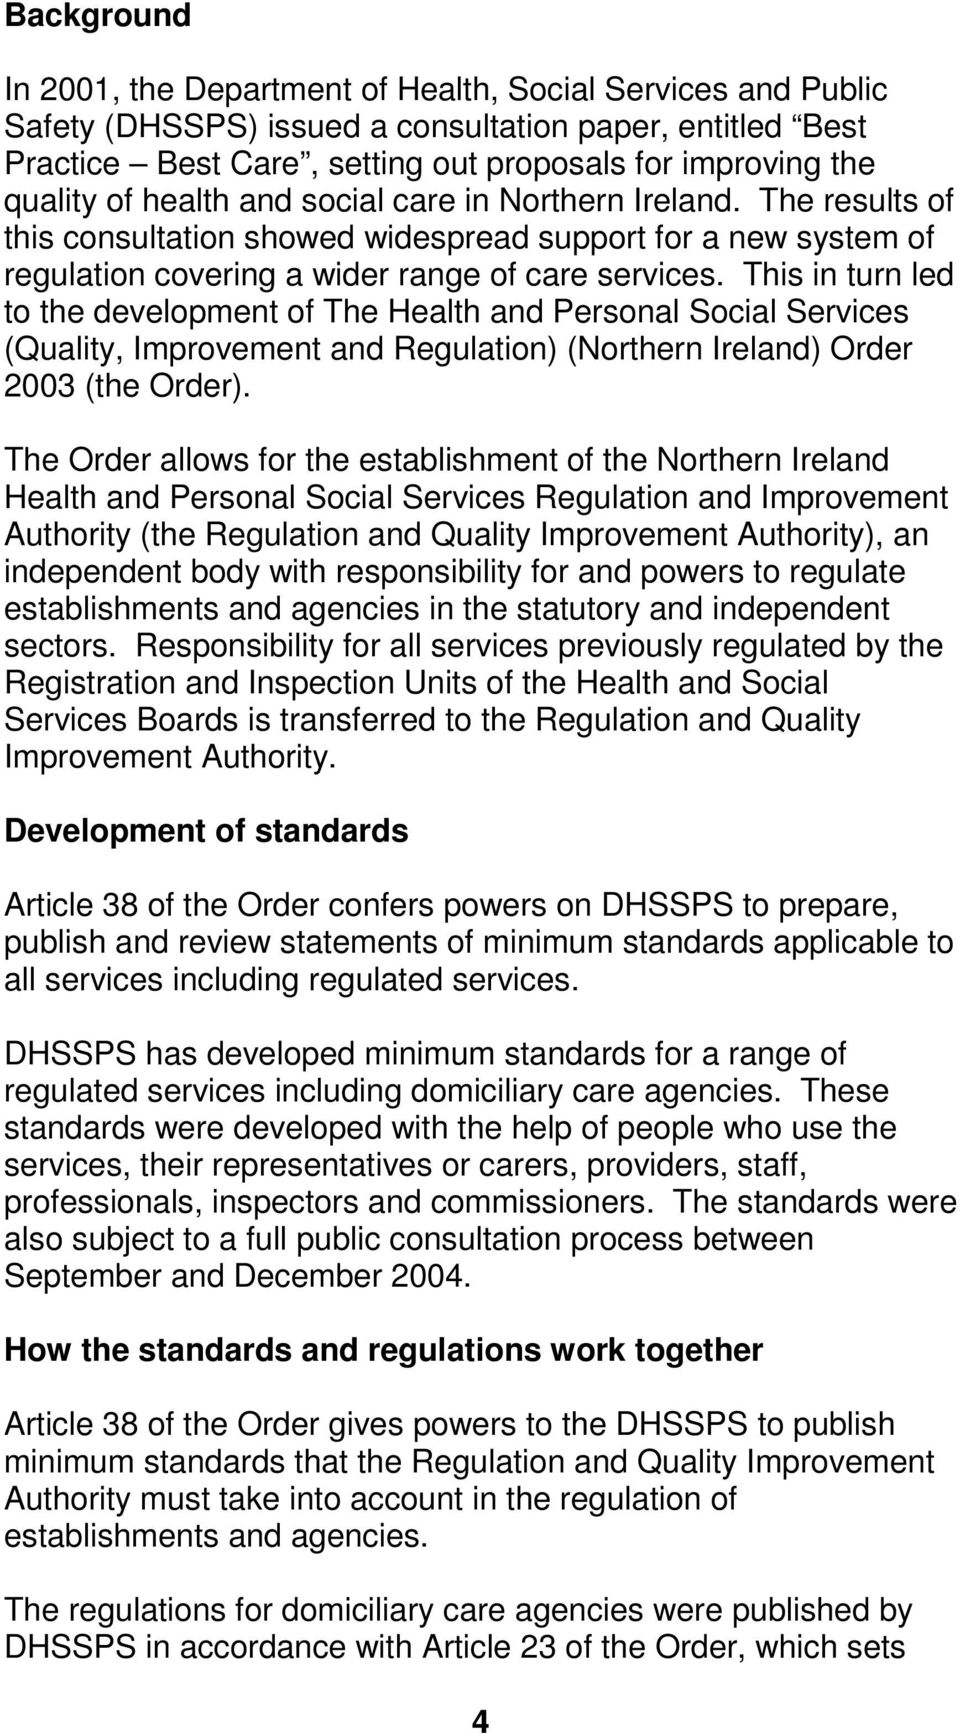 This in turn led to the development of The Health and Personal Social Services (Quality, Improvement and Regulation) (Northern Ireland) Order 2003 (the Order).